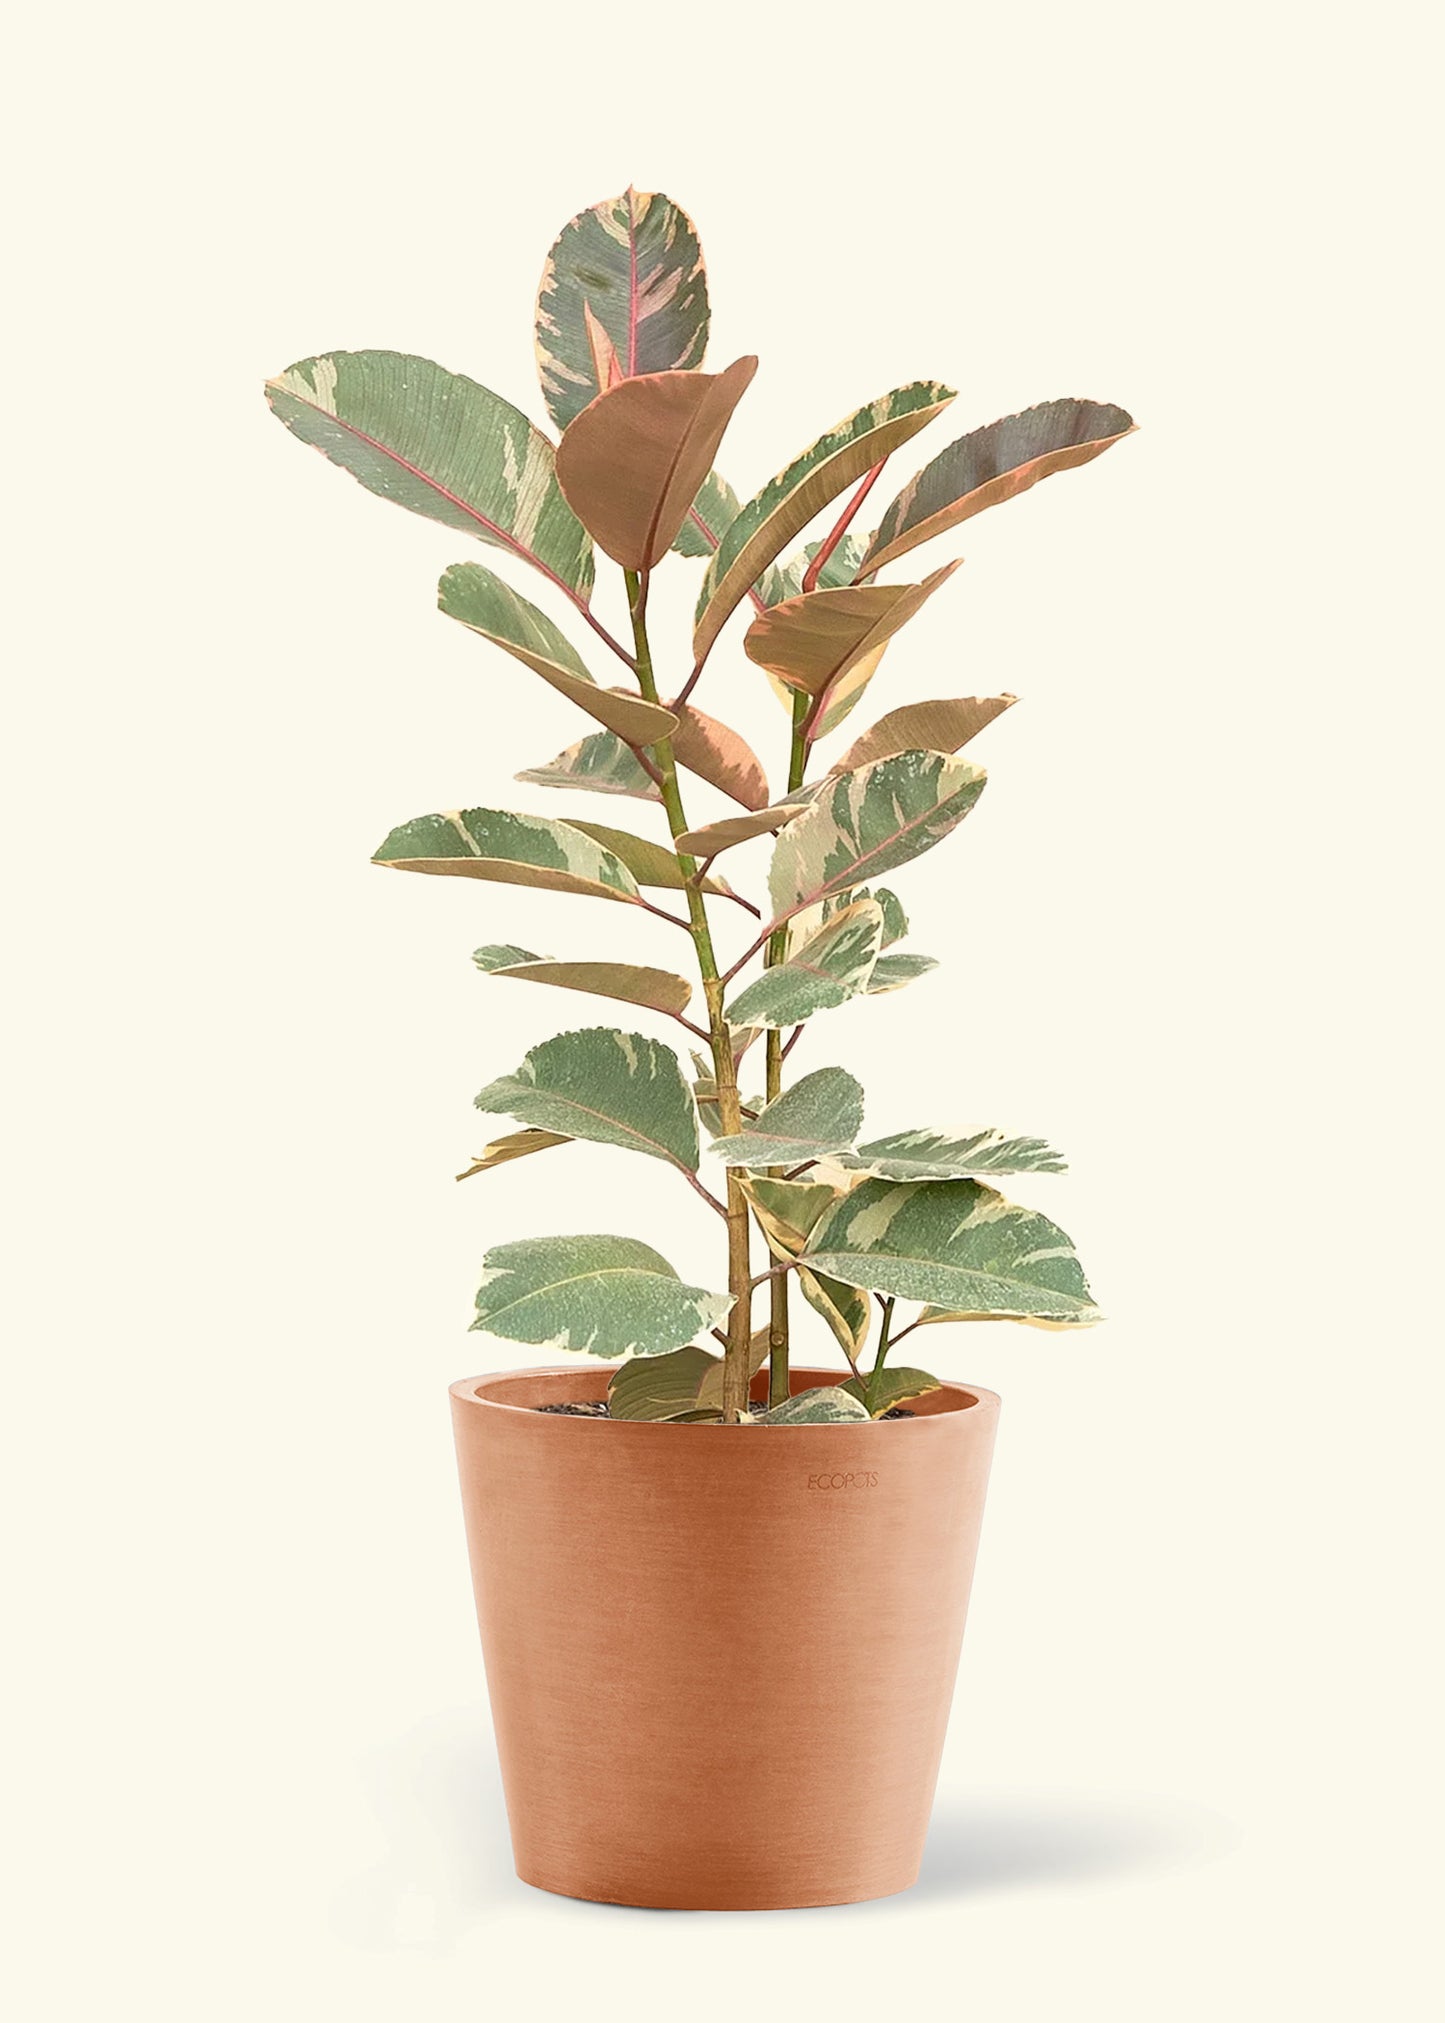 Large Ruby Rubber Tree in a terracotta pot.